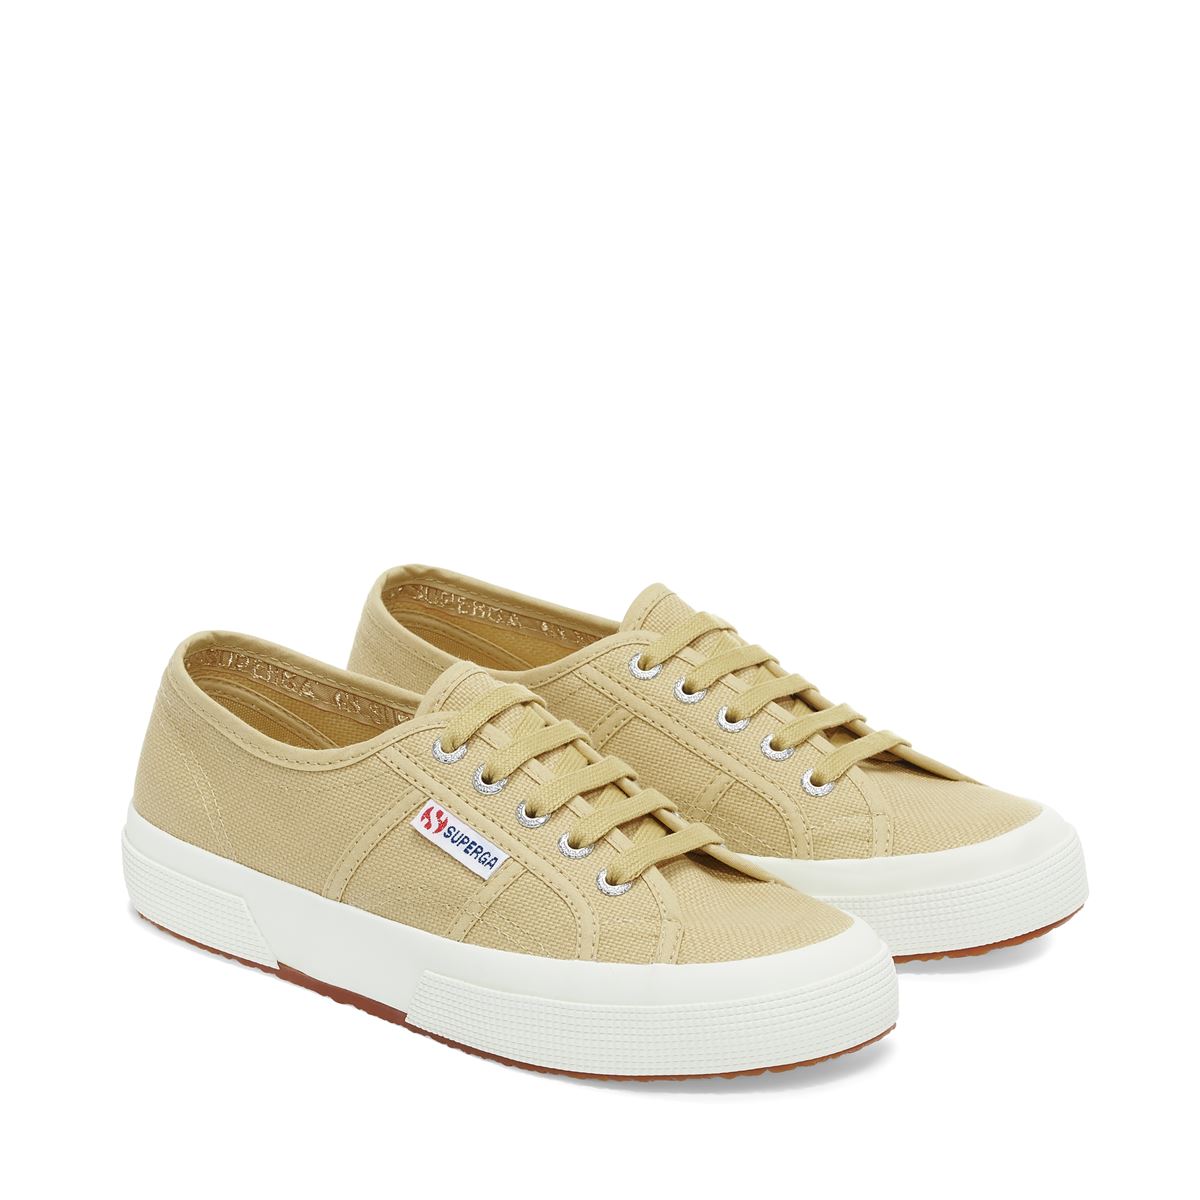 2750 Cotu Classic Sneakers Beige Almond- Hover Image